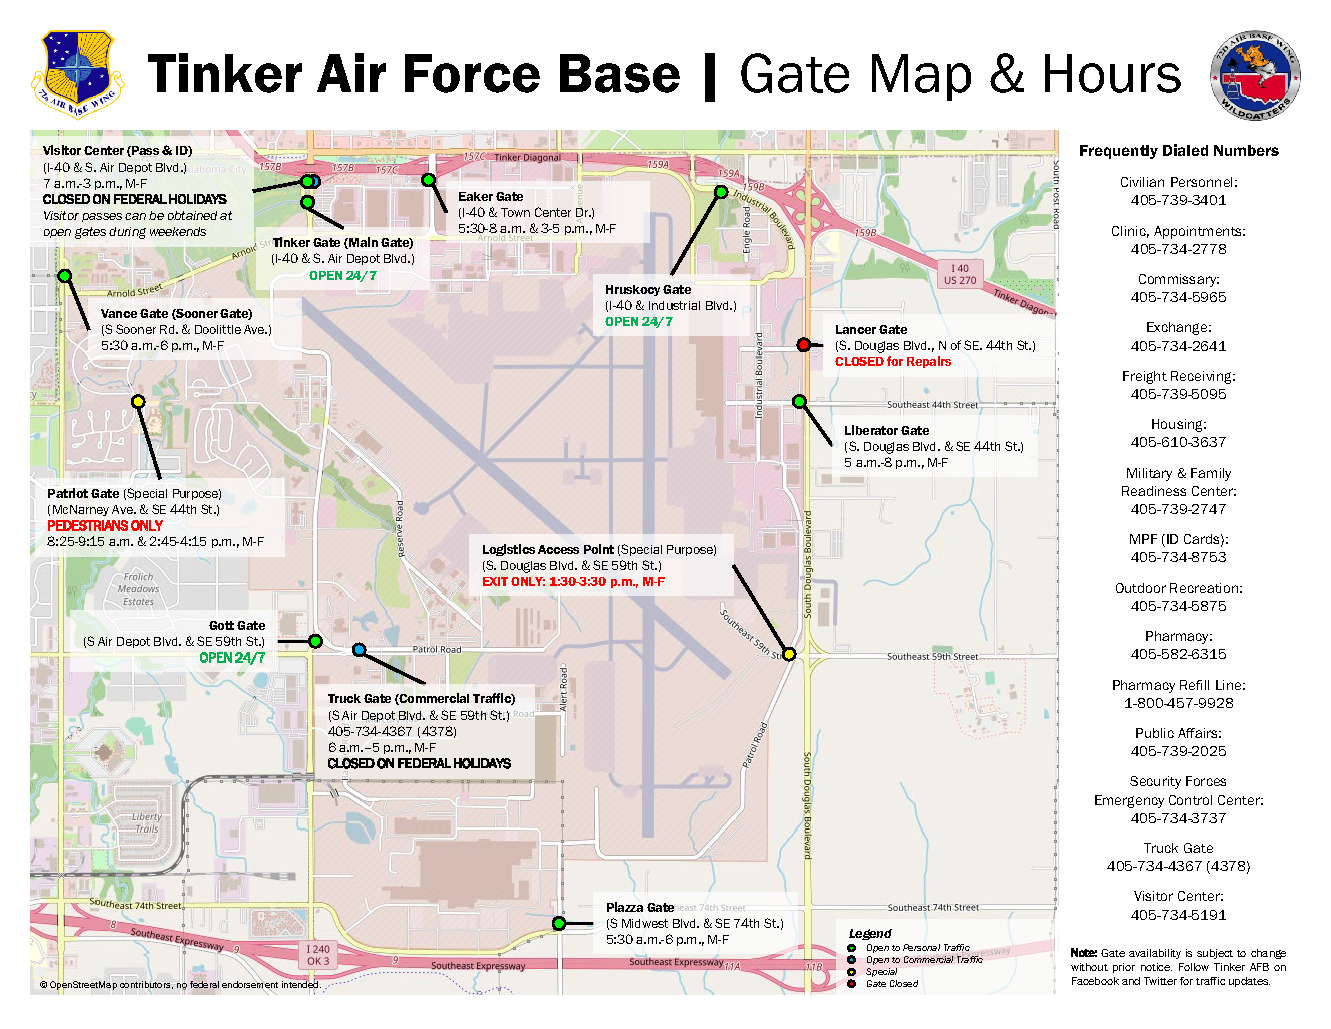 Link to Tinker Gate Hours Map